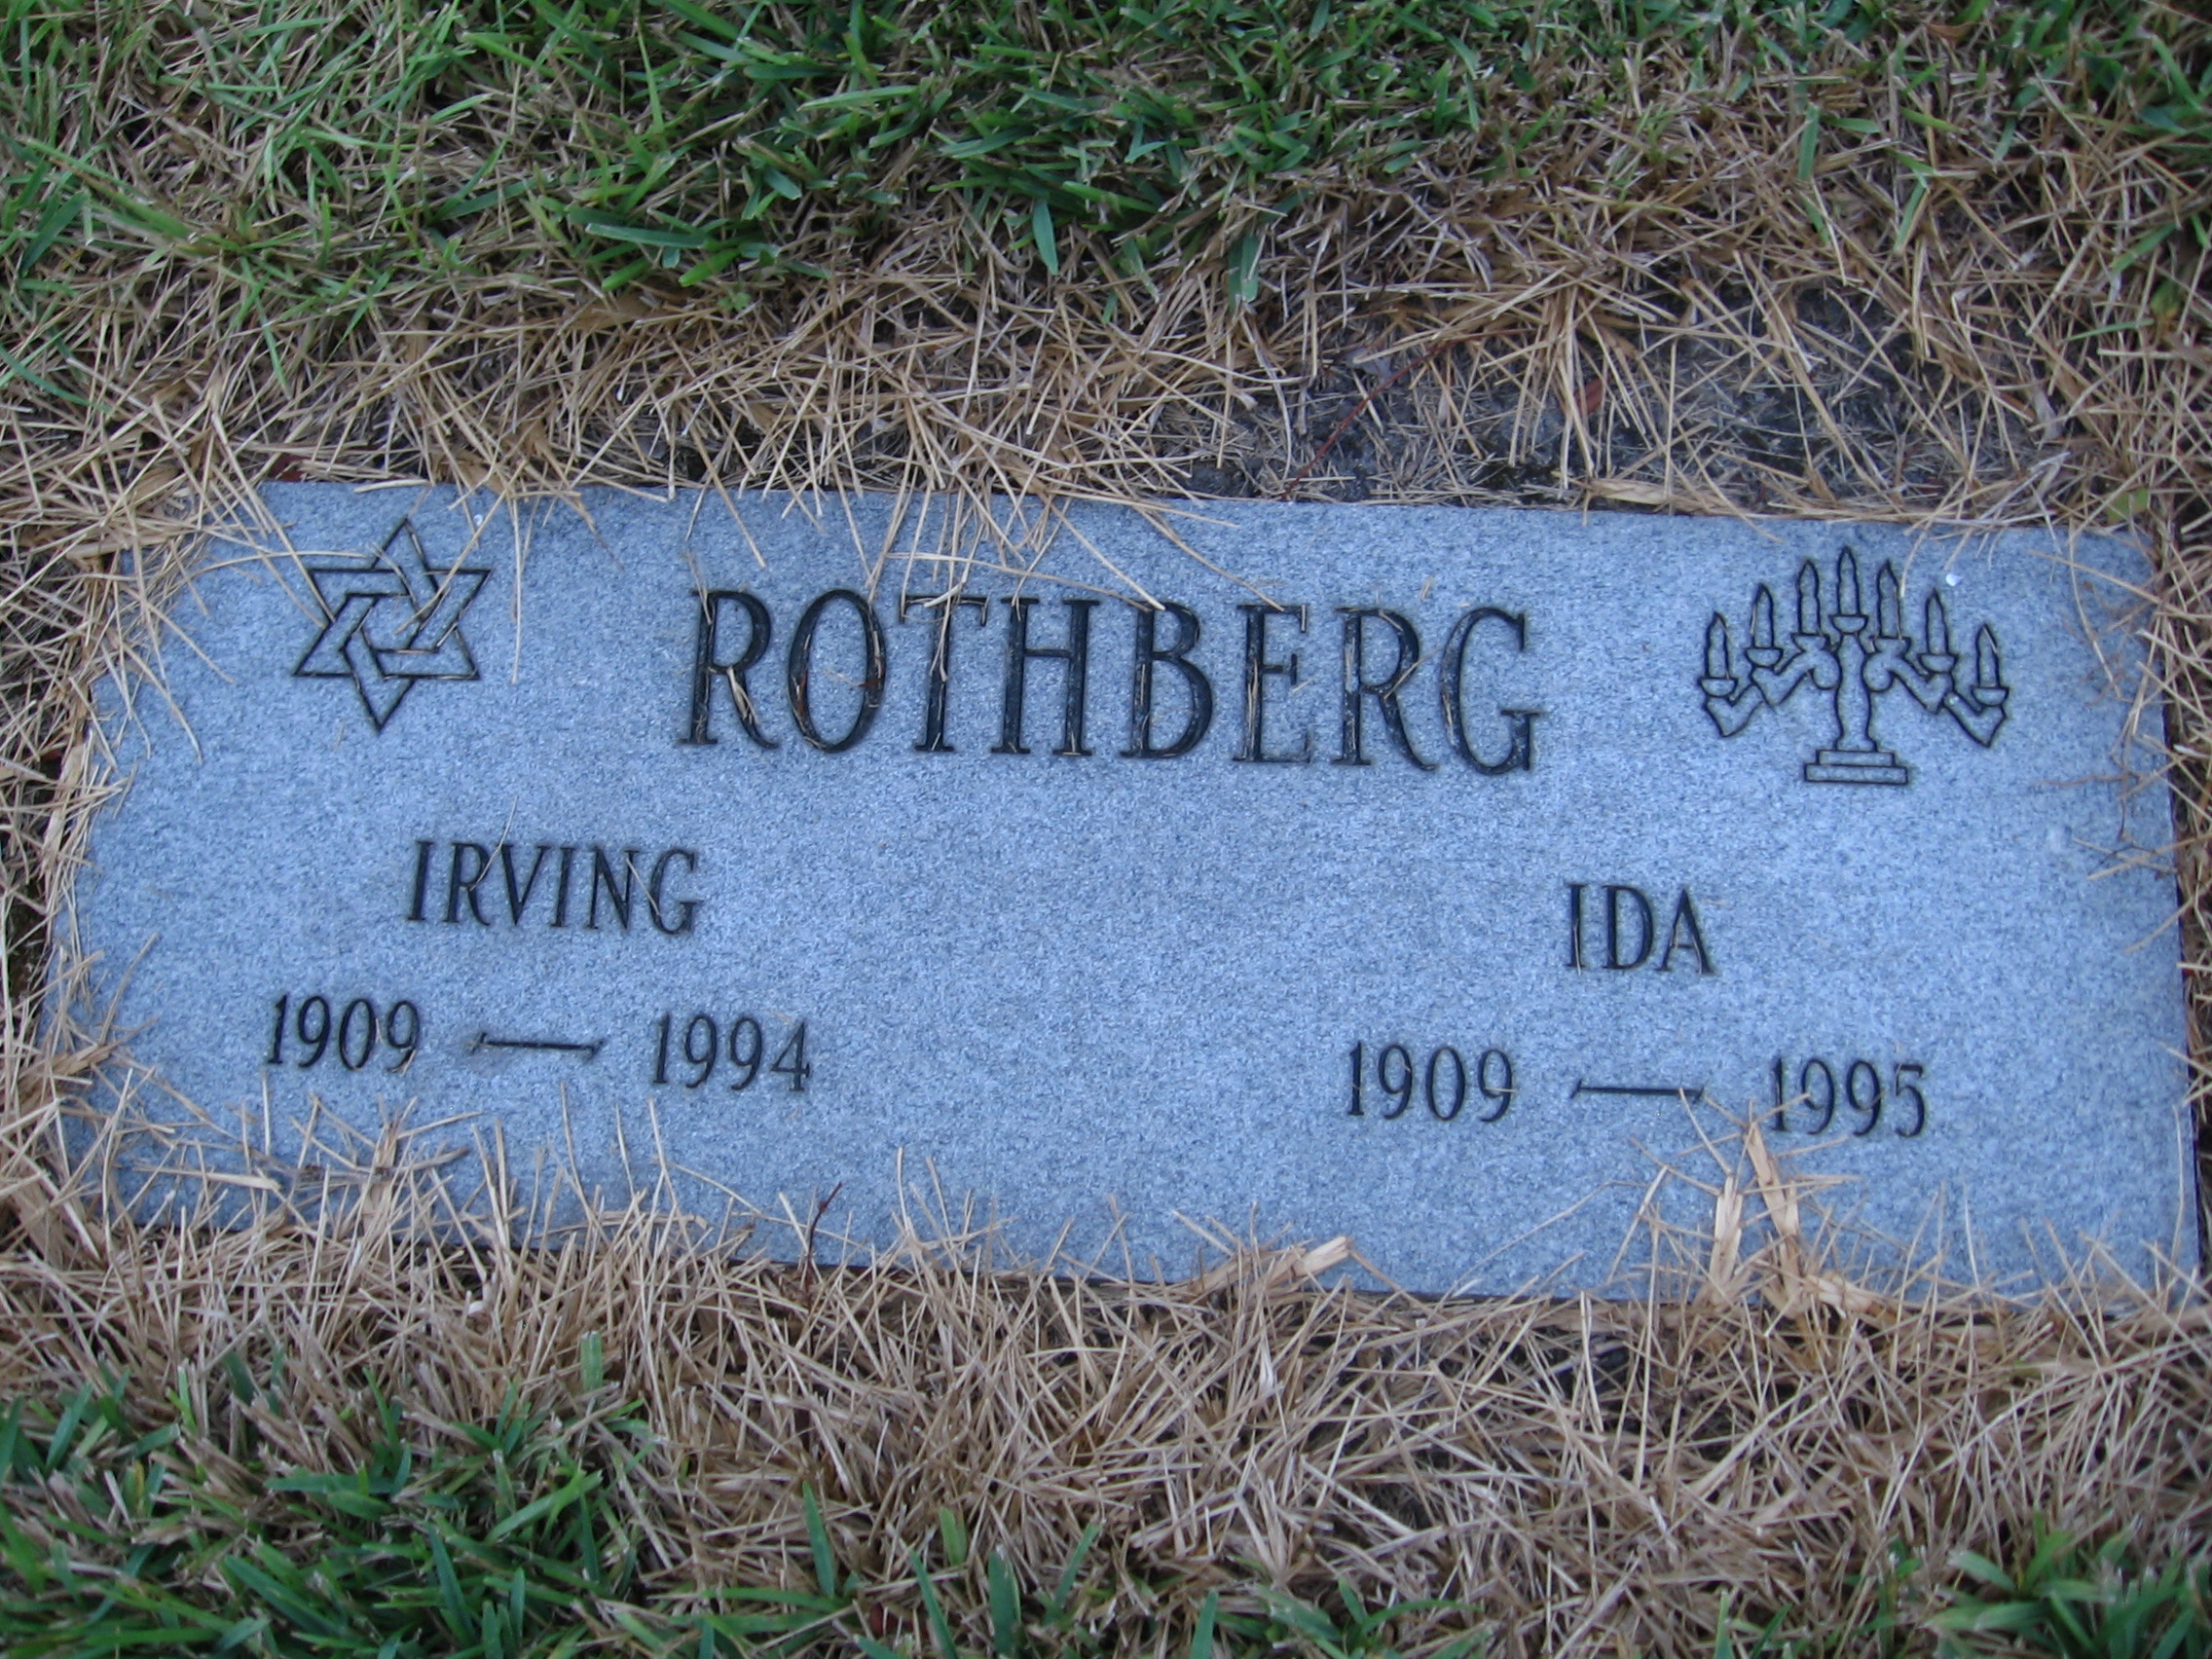 Irving Rothberg